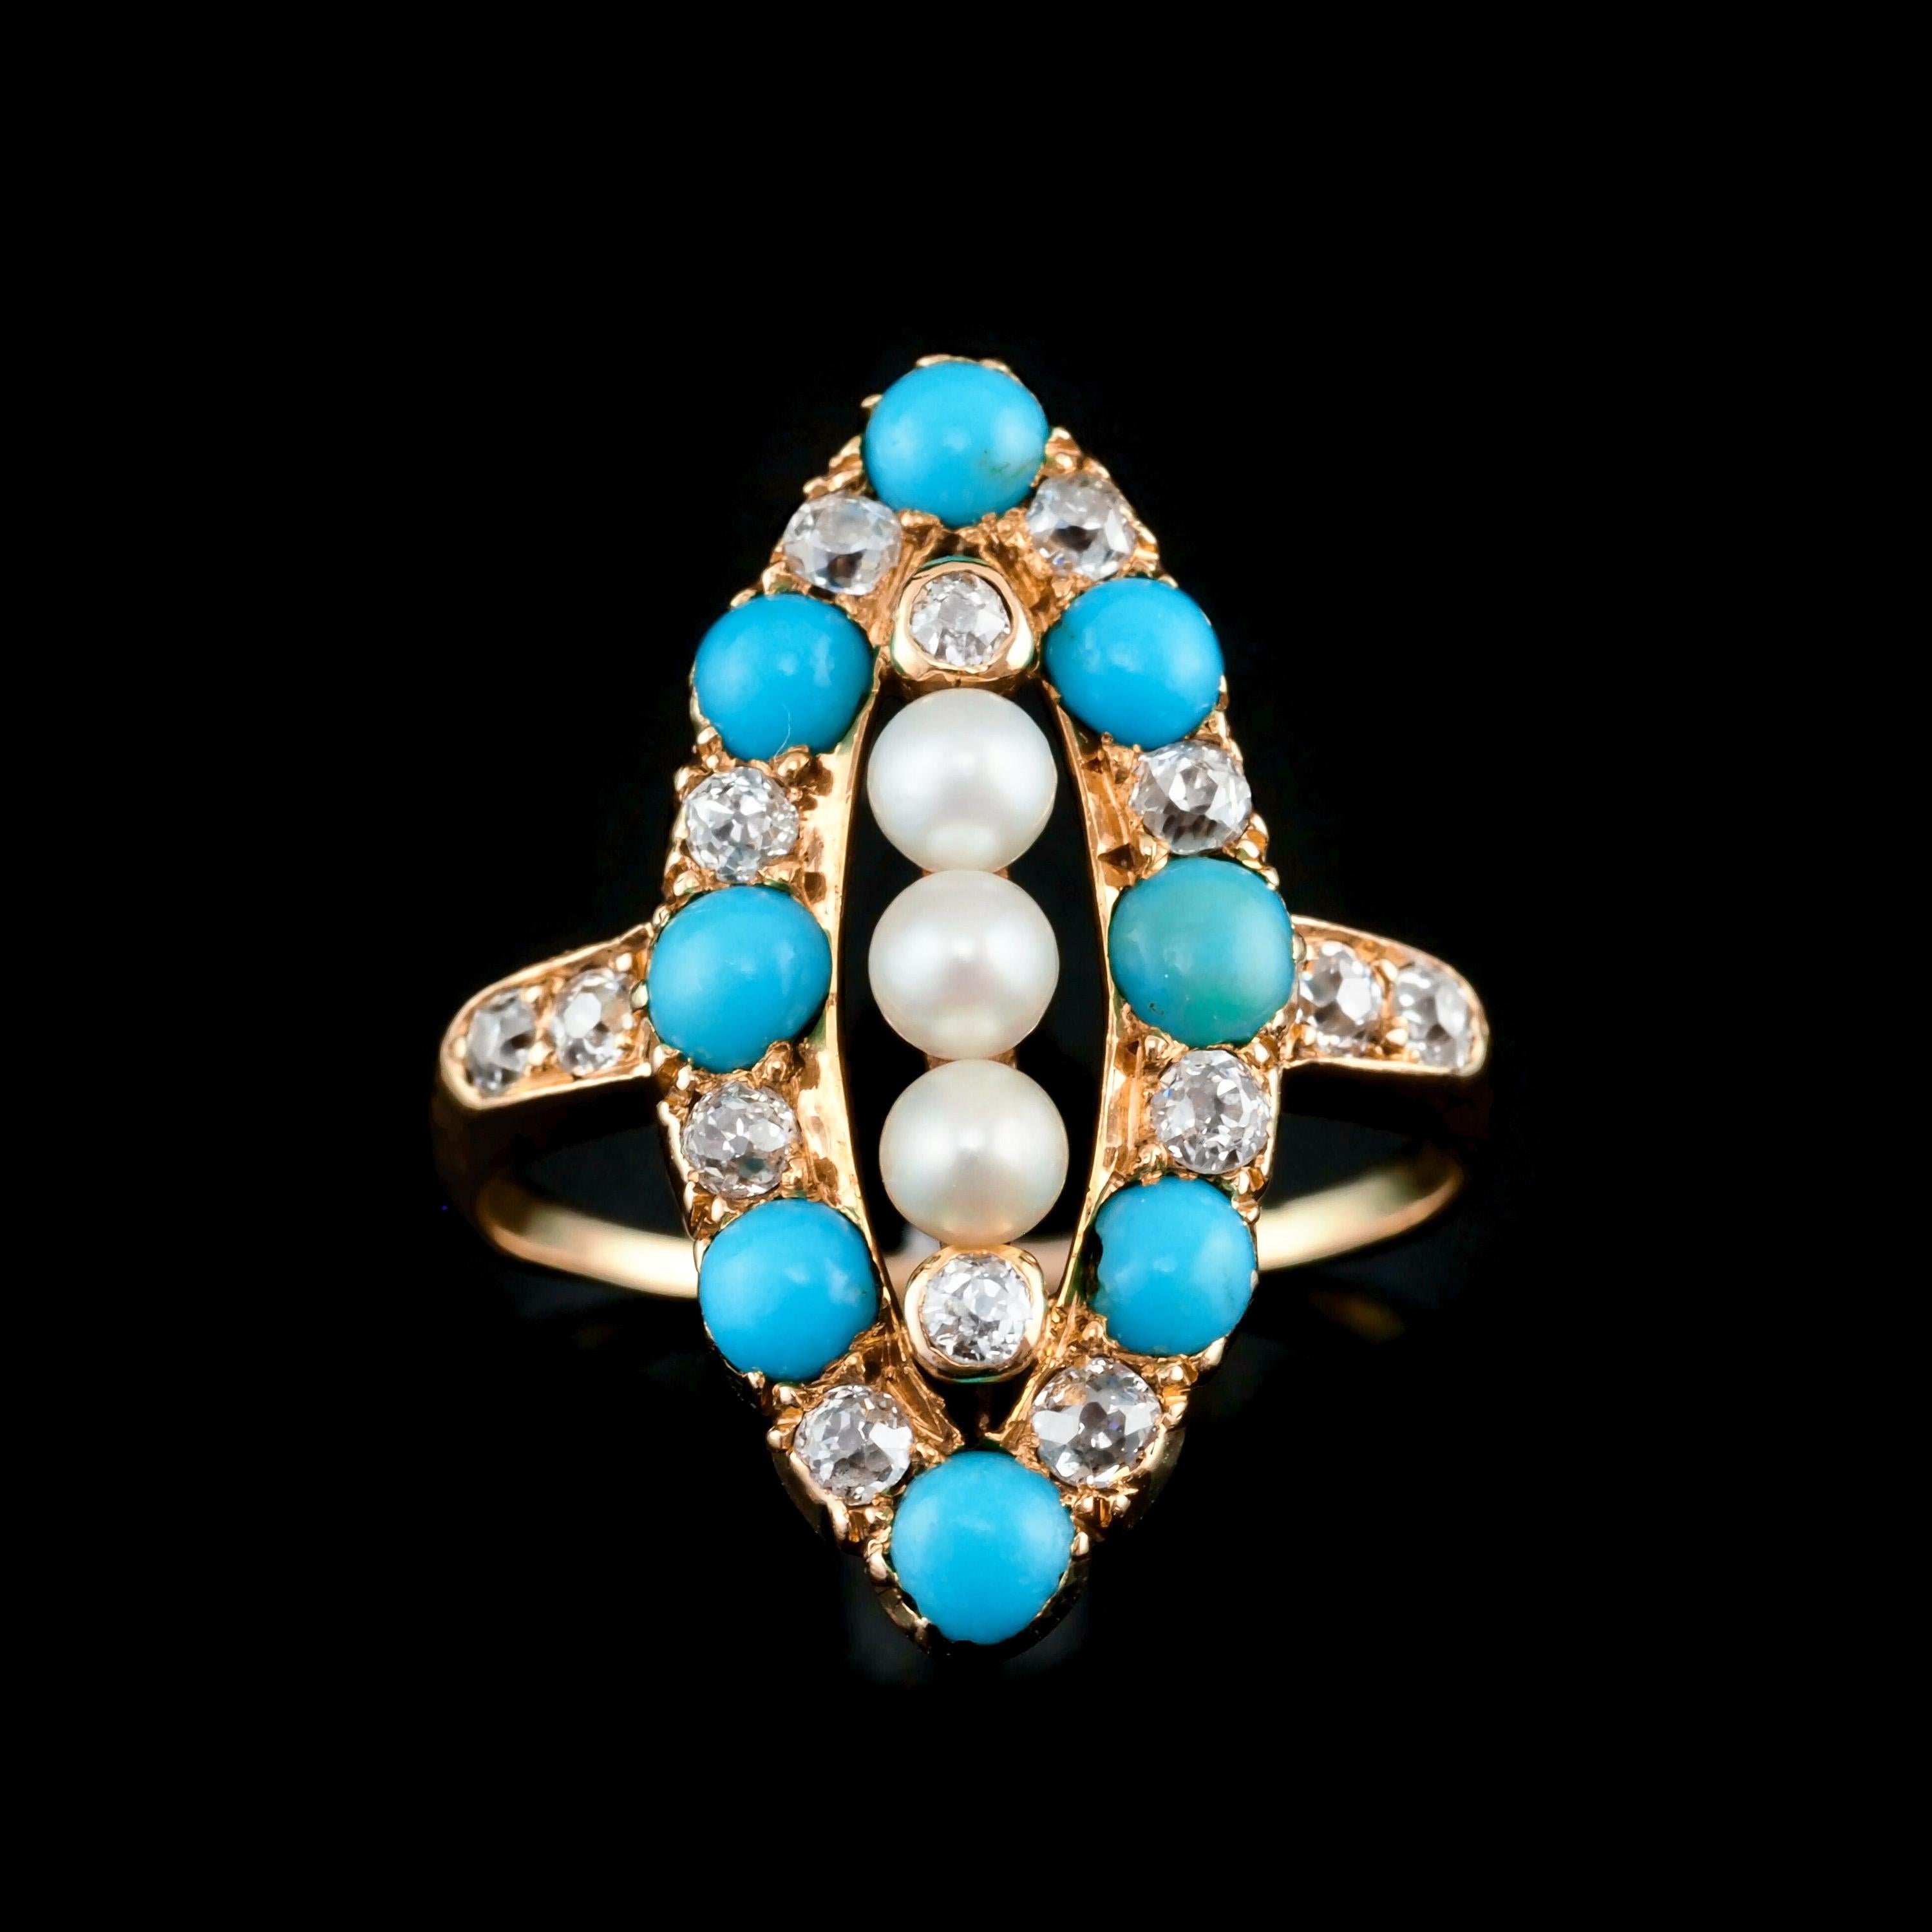 Antique Victorian Diamond Pearl Turquoise 18K Gold Ring Navette/Marquise c.1880 For Sale 1